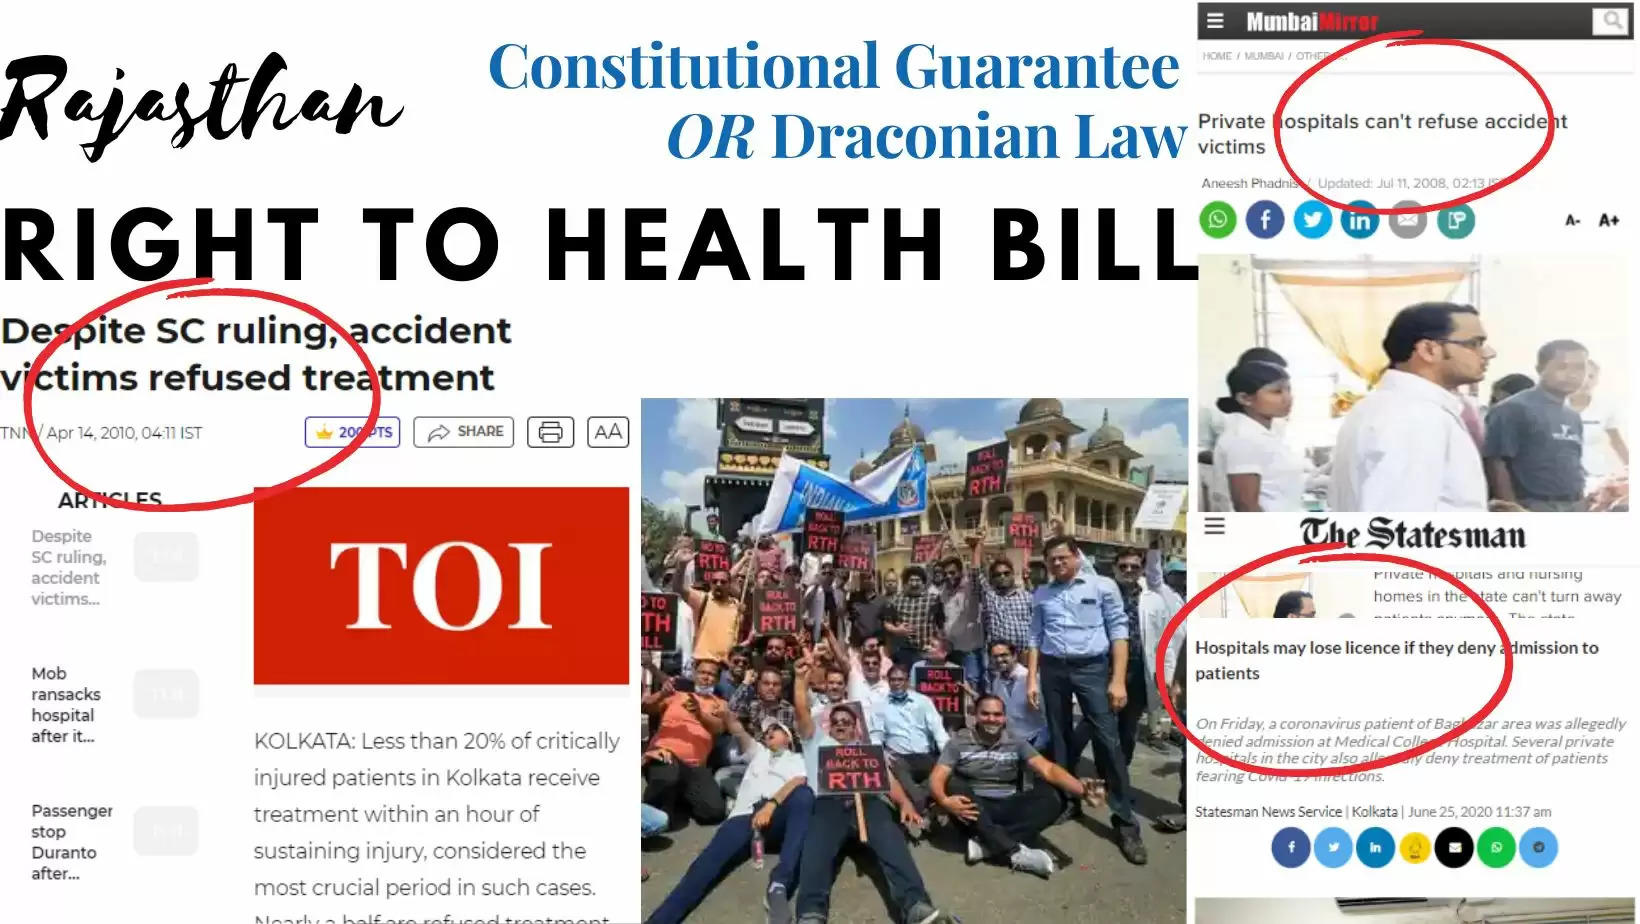 Opinion on Rajasthan Right to Health Bill Constitutional Guarantee Fulfilled or a Draconian Law